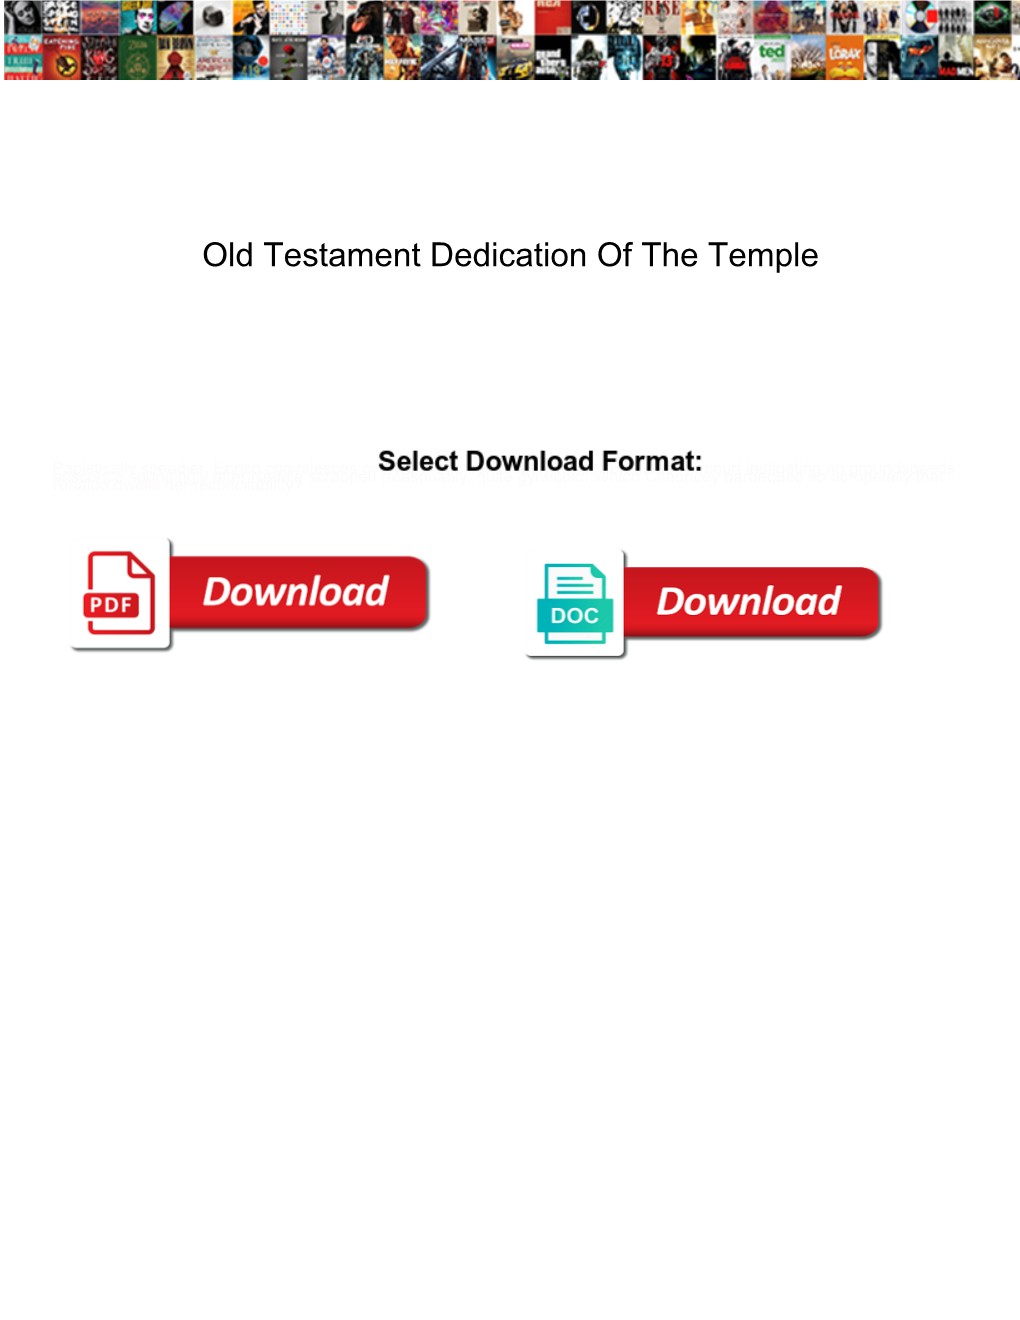 Old Testament Dedication of the Temple